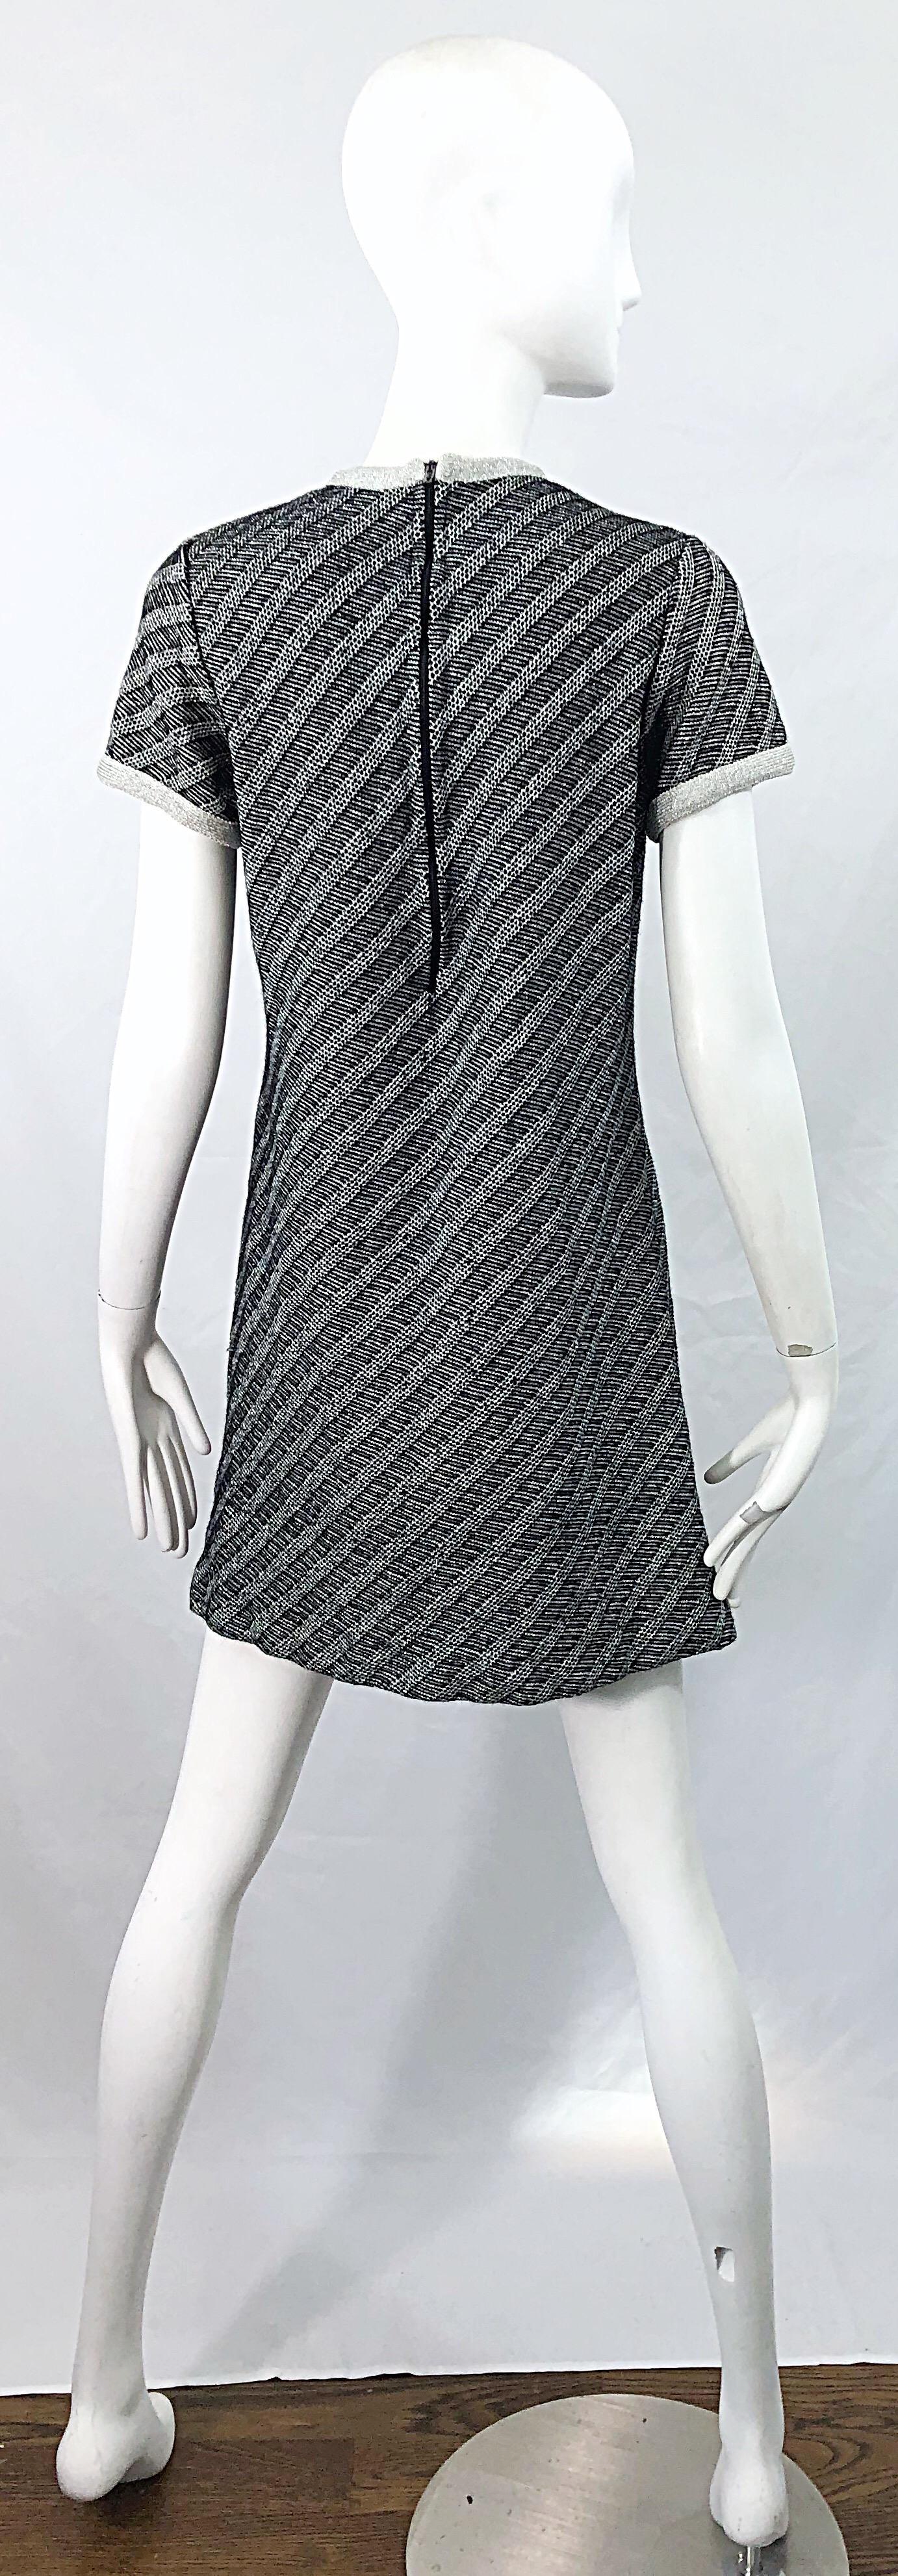 Chic 1960s Black and Silver Metallic Knit Vintage Striped 60s Shift Dress For Sale 6